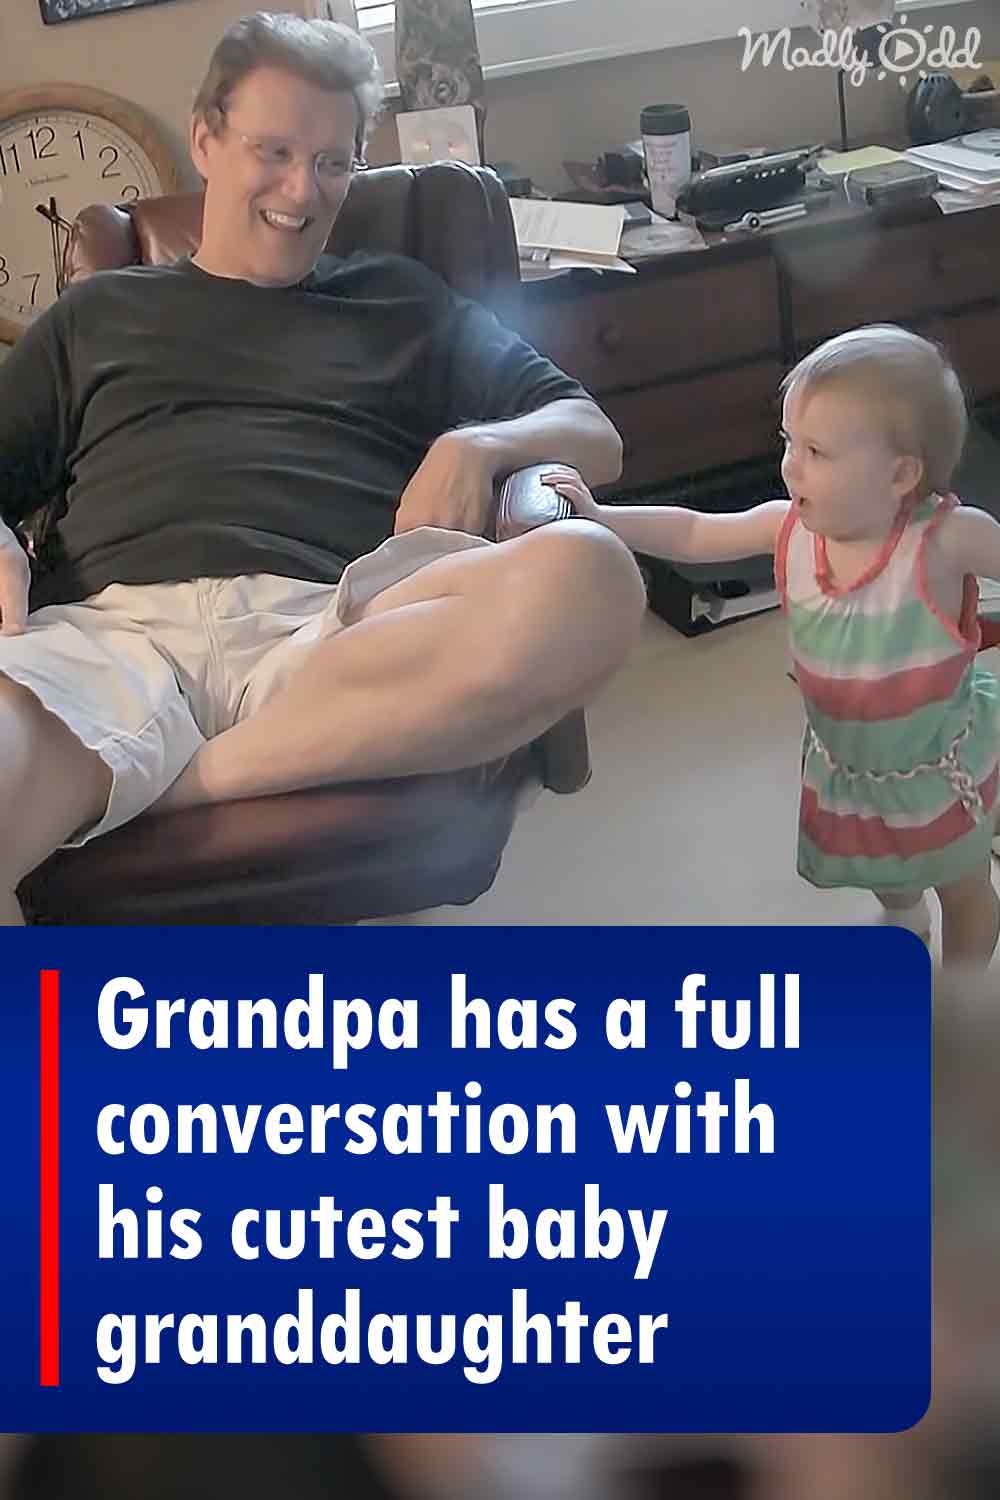 Grandpa has a full conversation with his cutest baby granddaughter